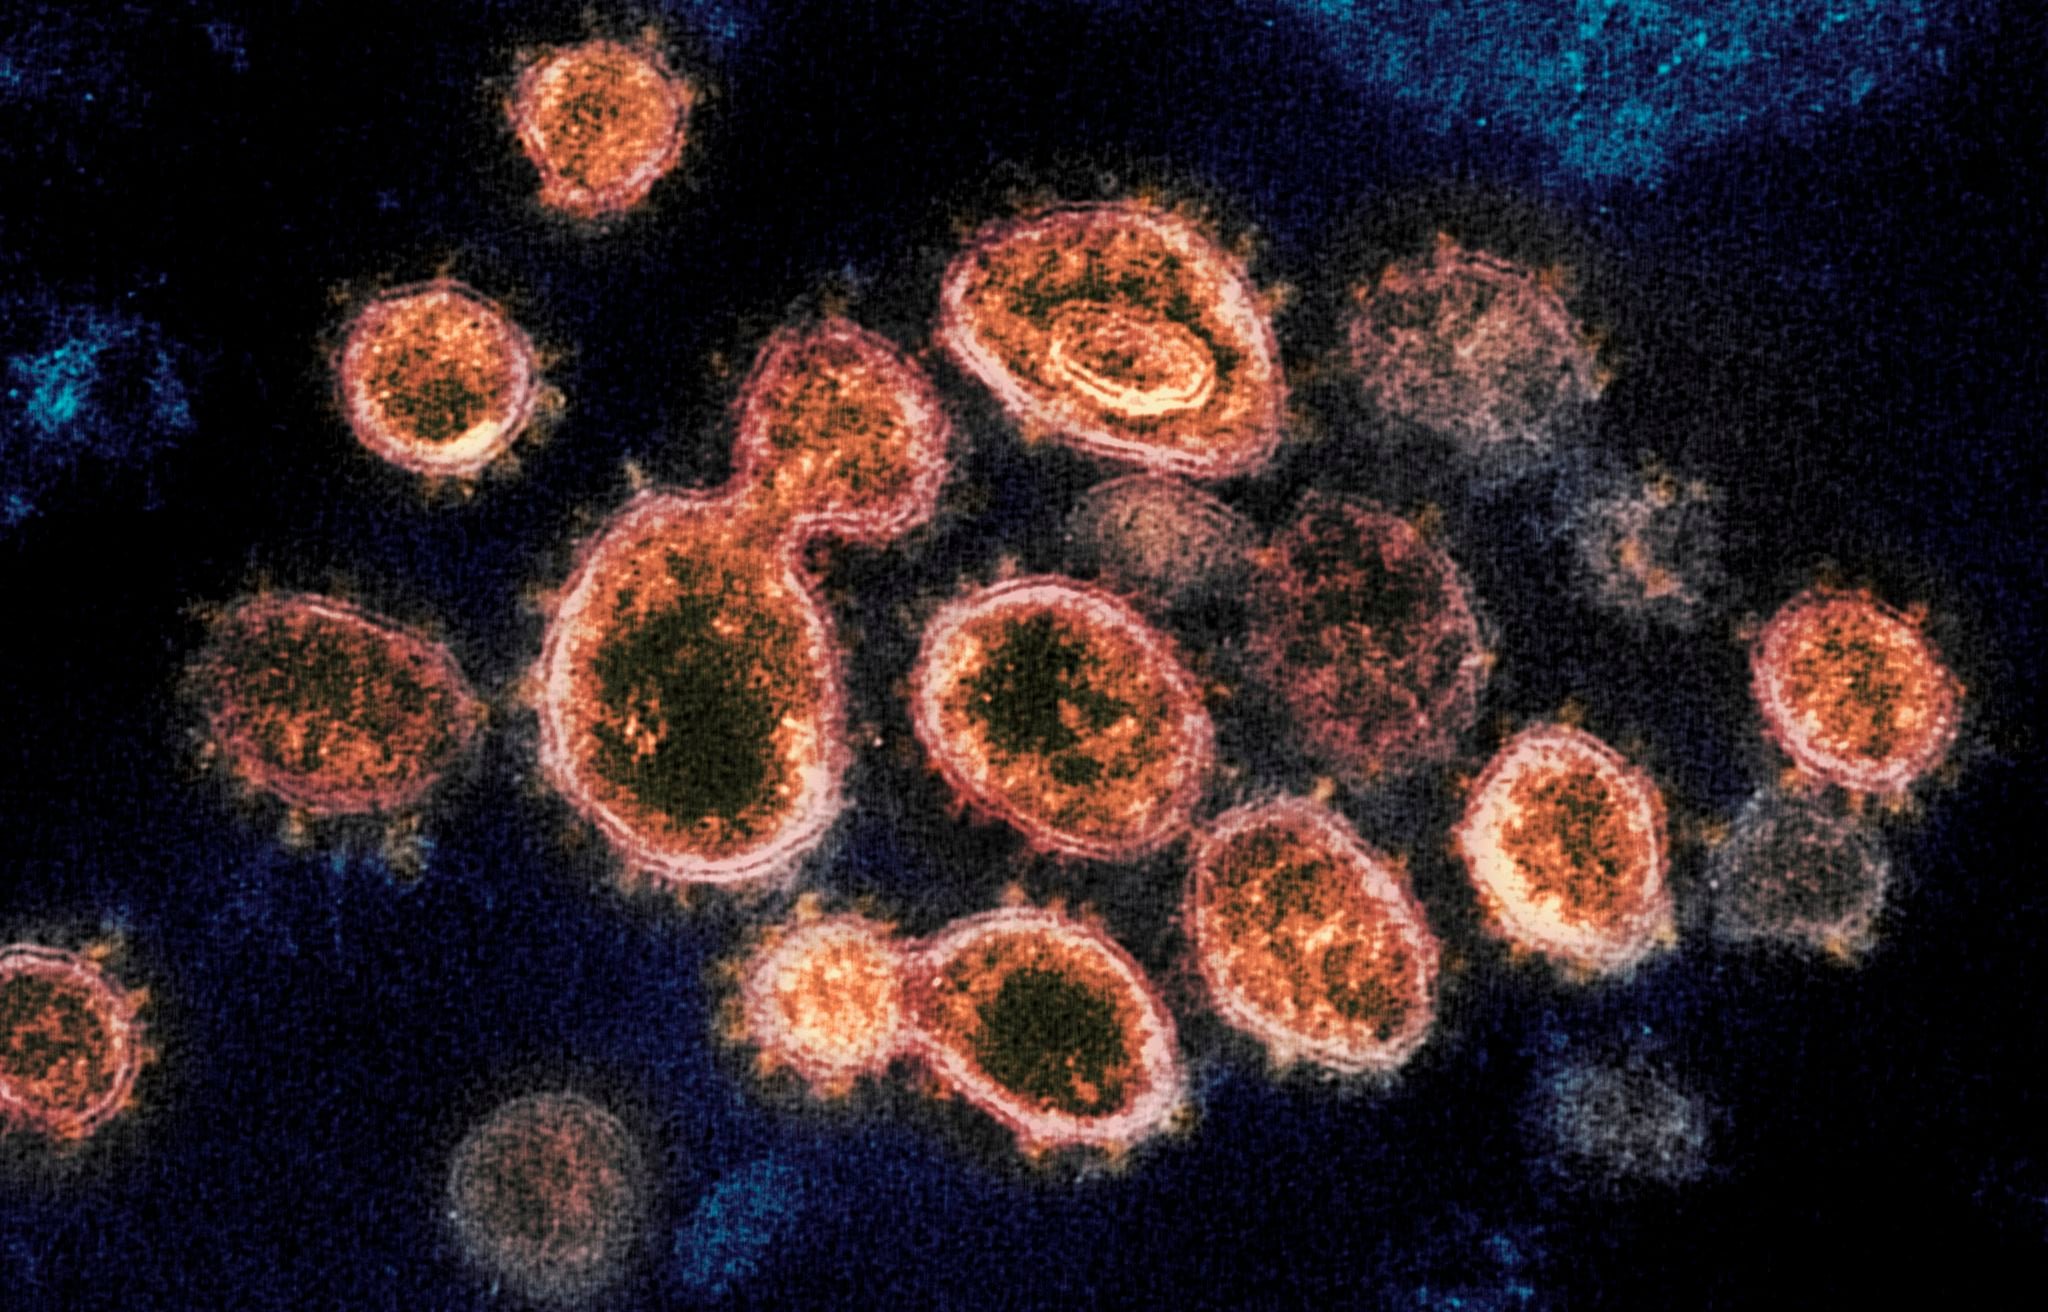 Scientists pinpoint genes common among people with severe coronavirus infections